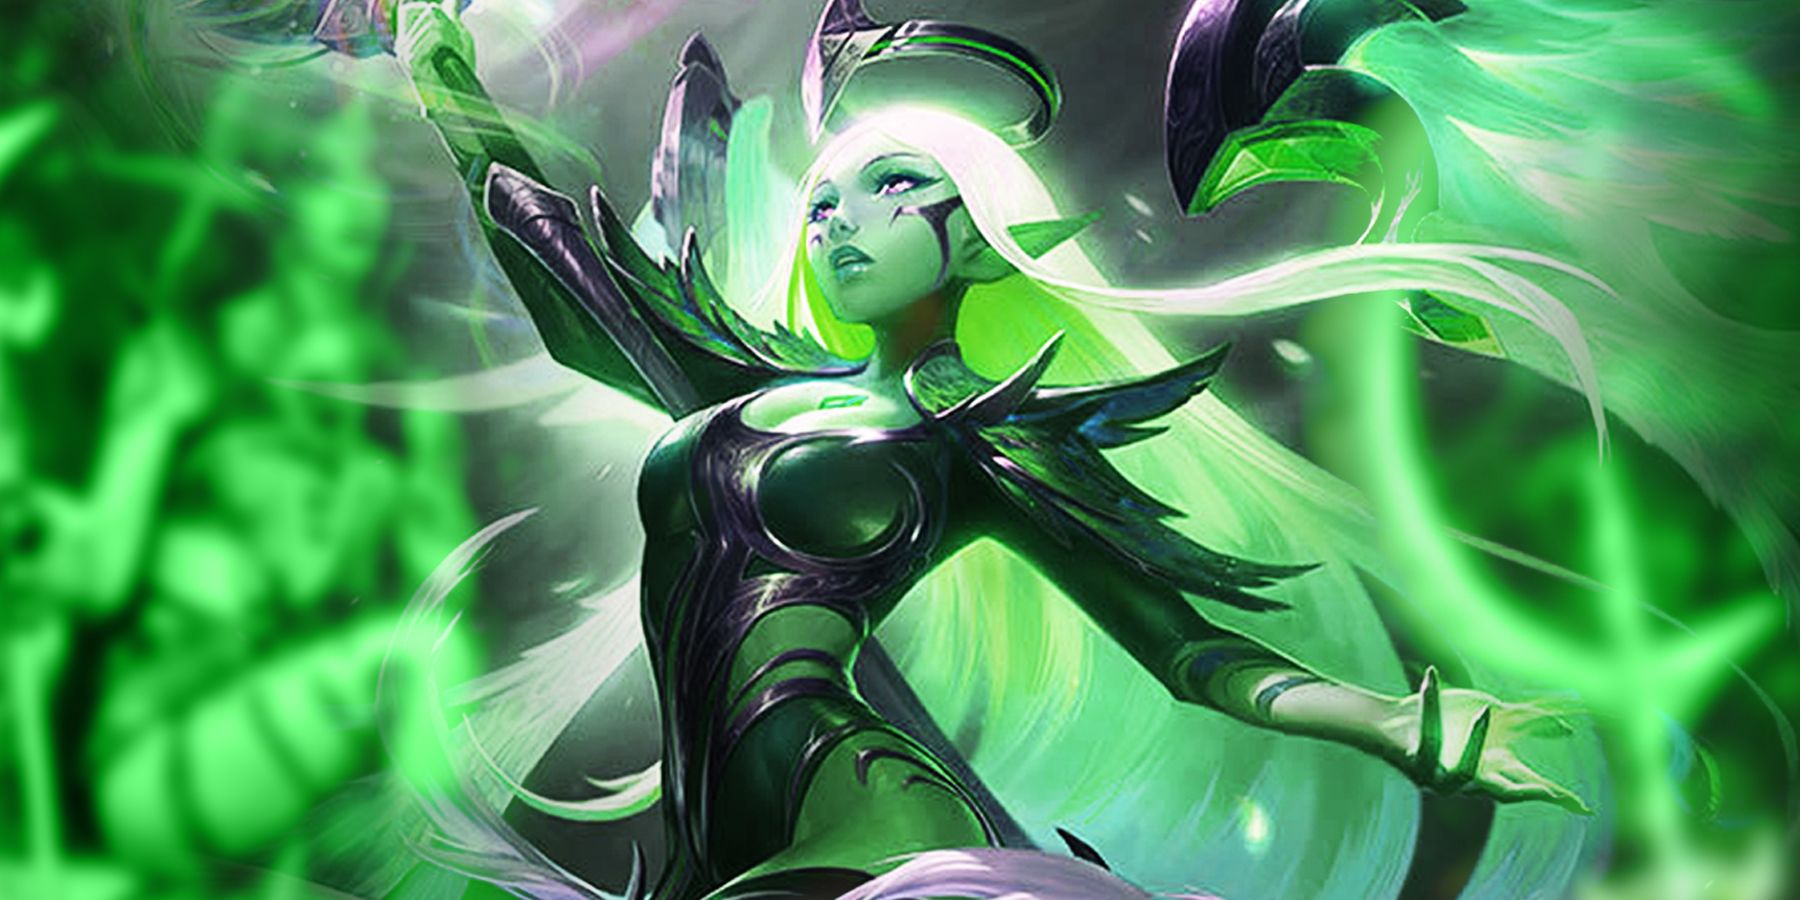 Starchild of League of Legends in green